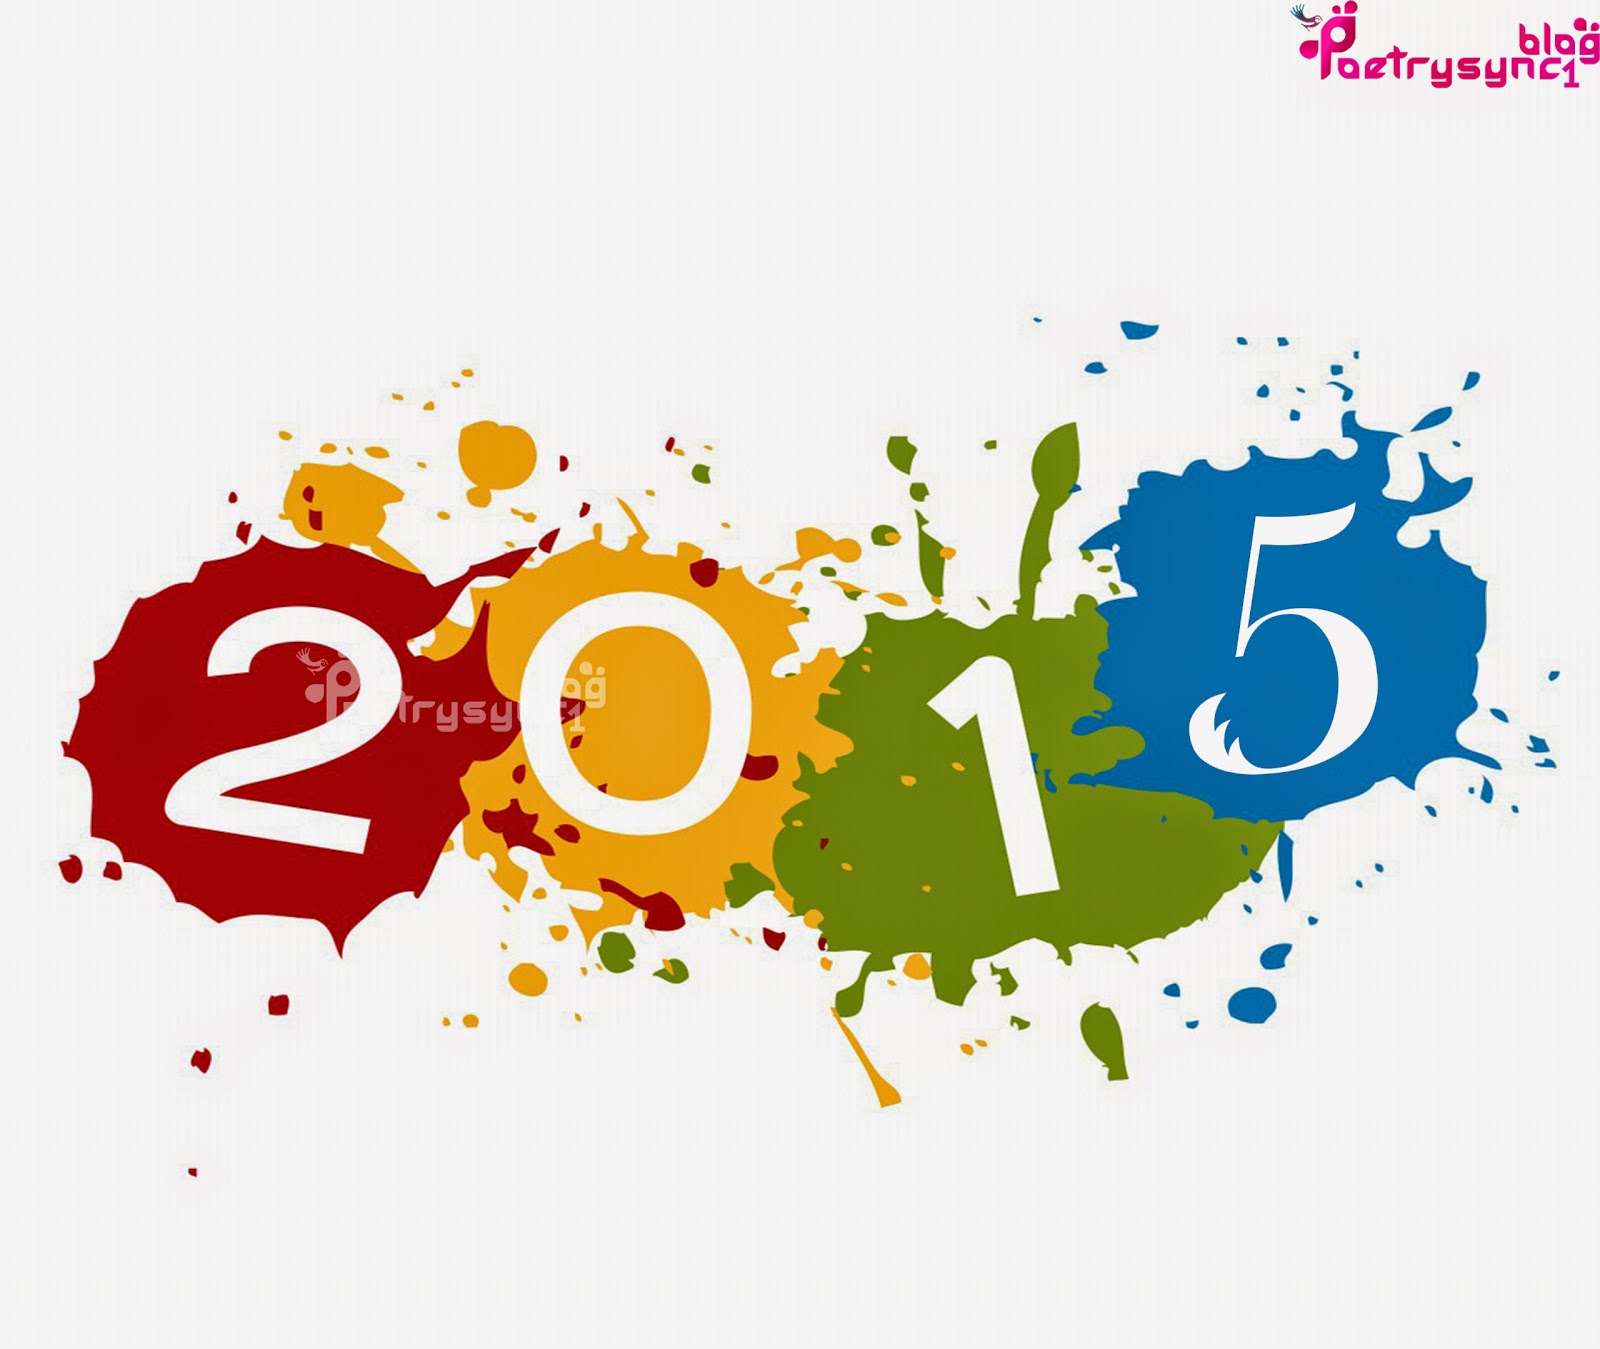 Happy-New-Year-2015-Wallpaper-Wishes-Image-HD-By-Poetrysync1.blog